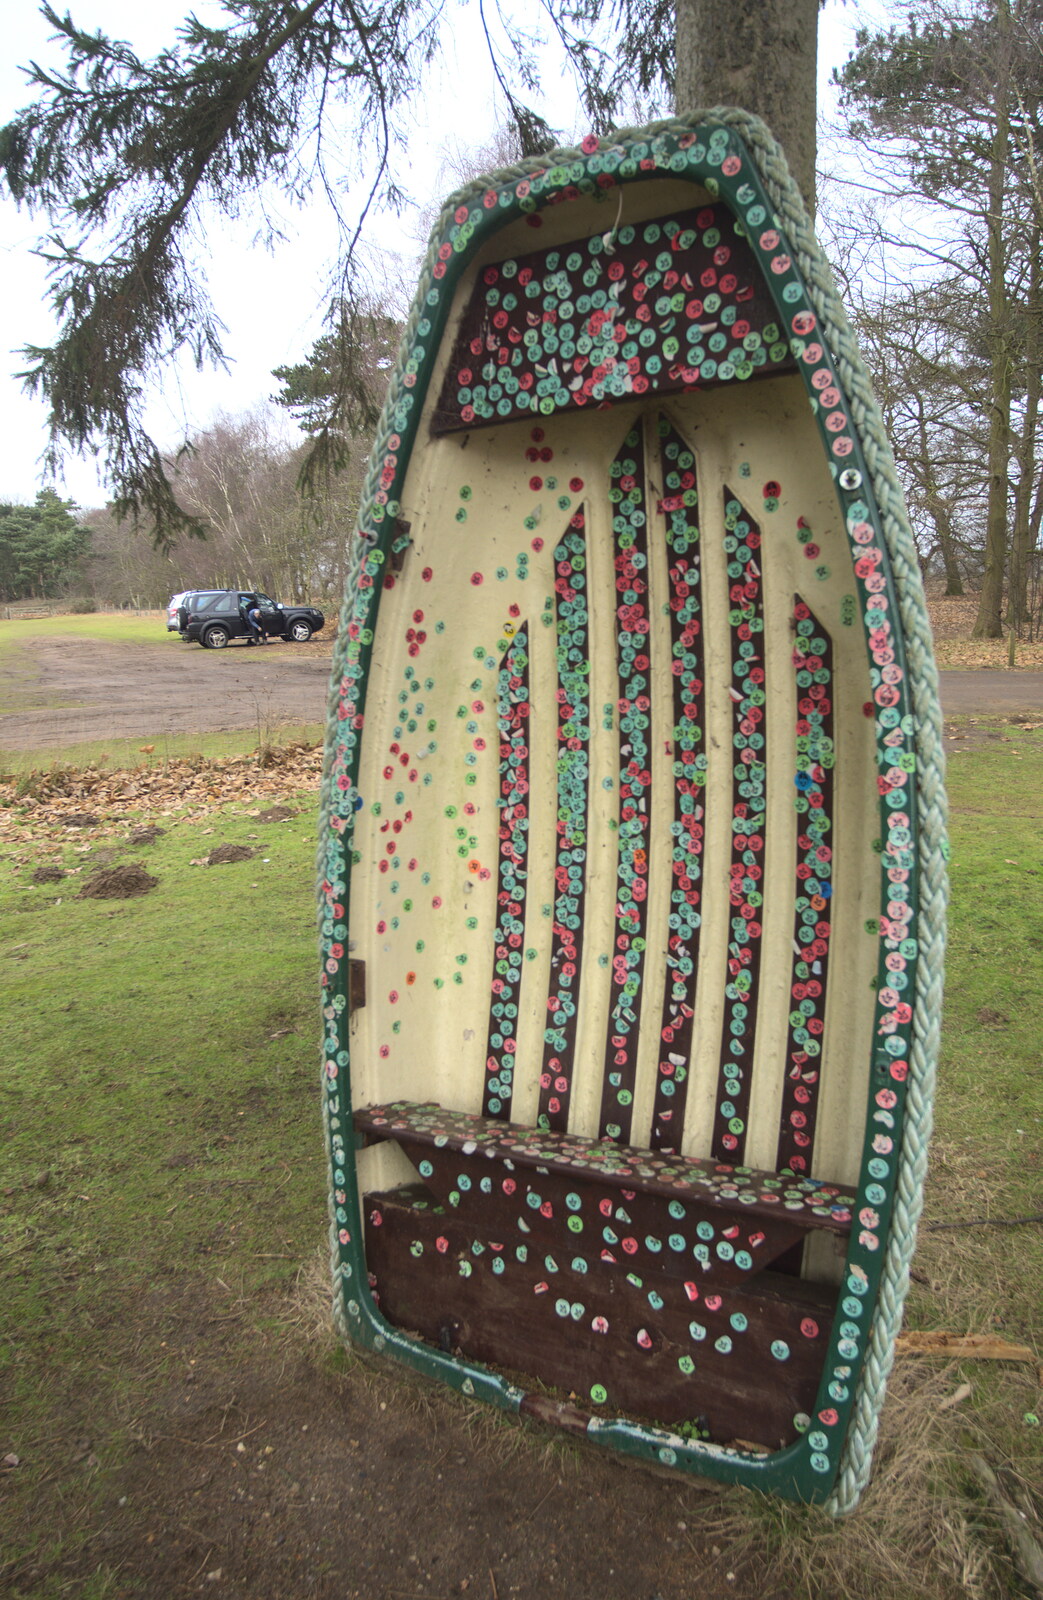 An upturned boat is covered in stickers from A Trip to Sutton Hoo, Woodbridge, Suffolk - 29th January 2017